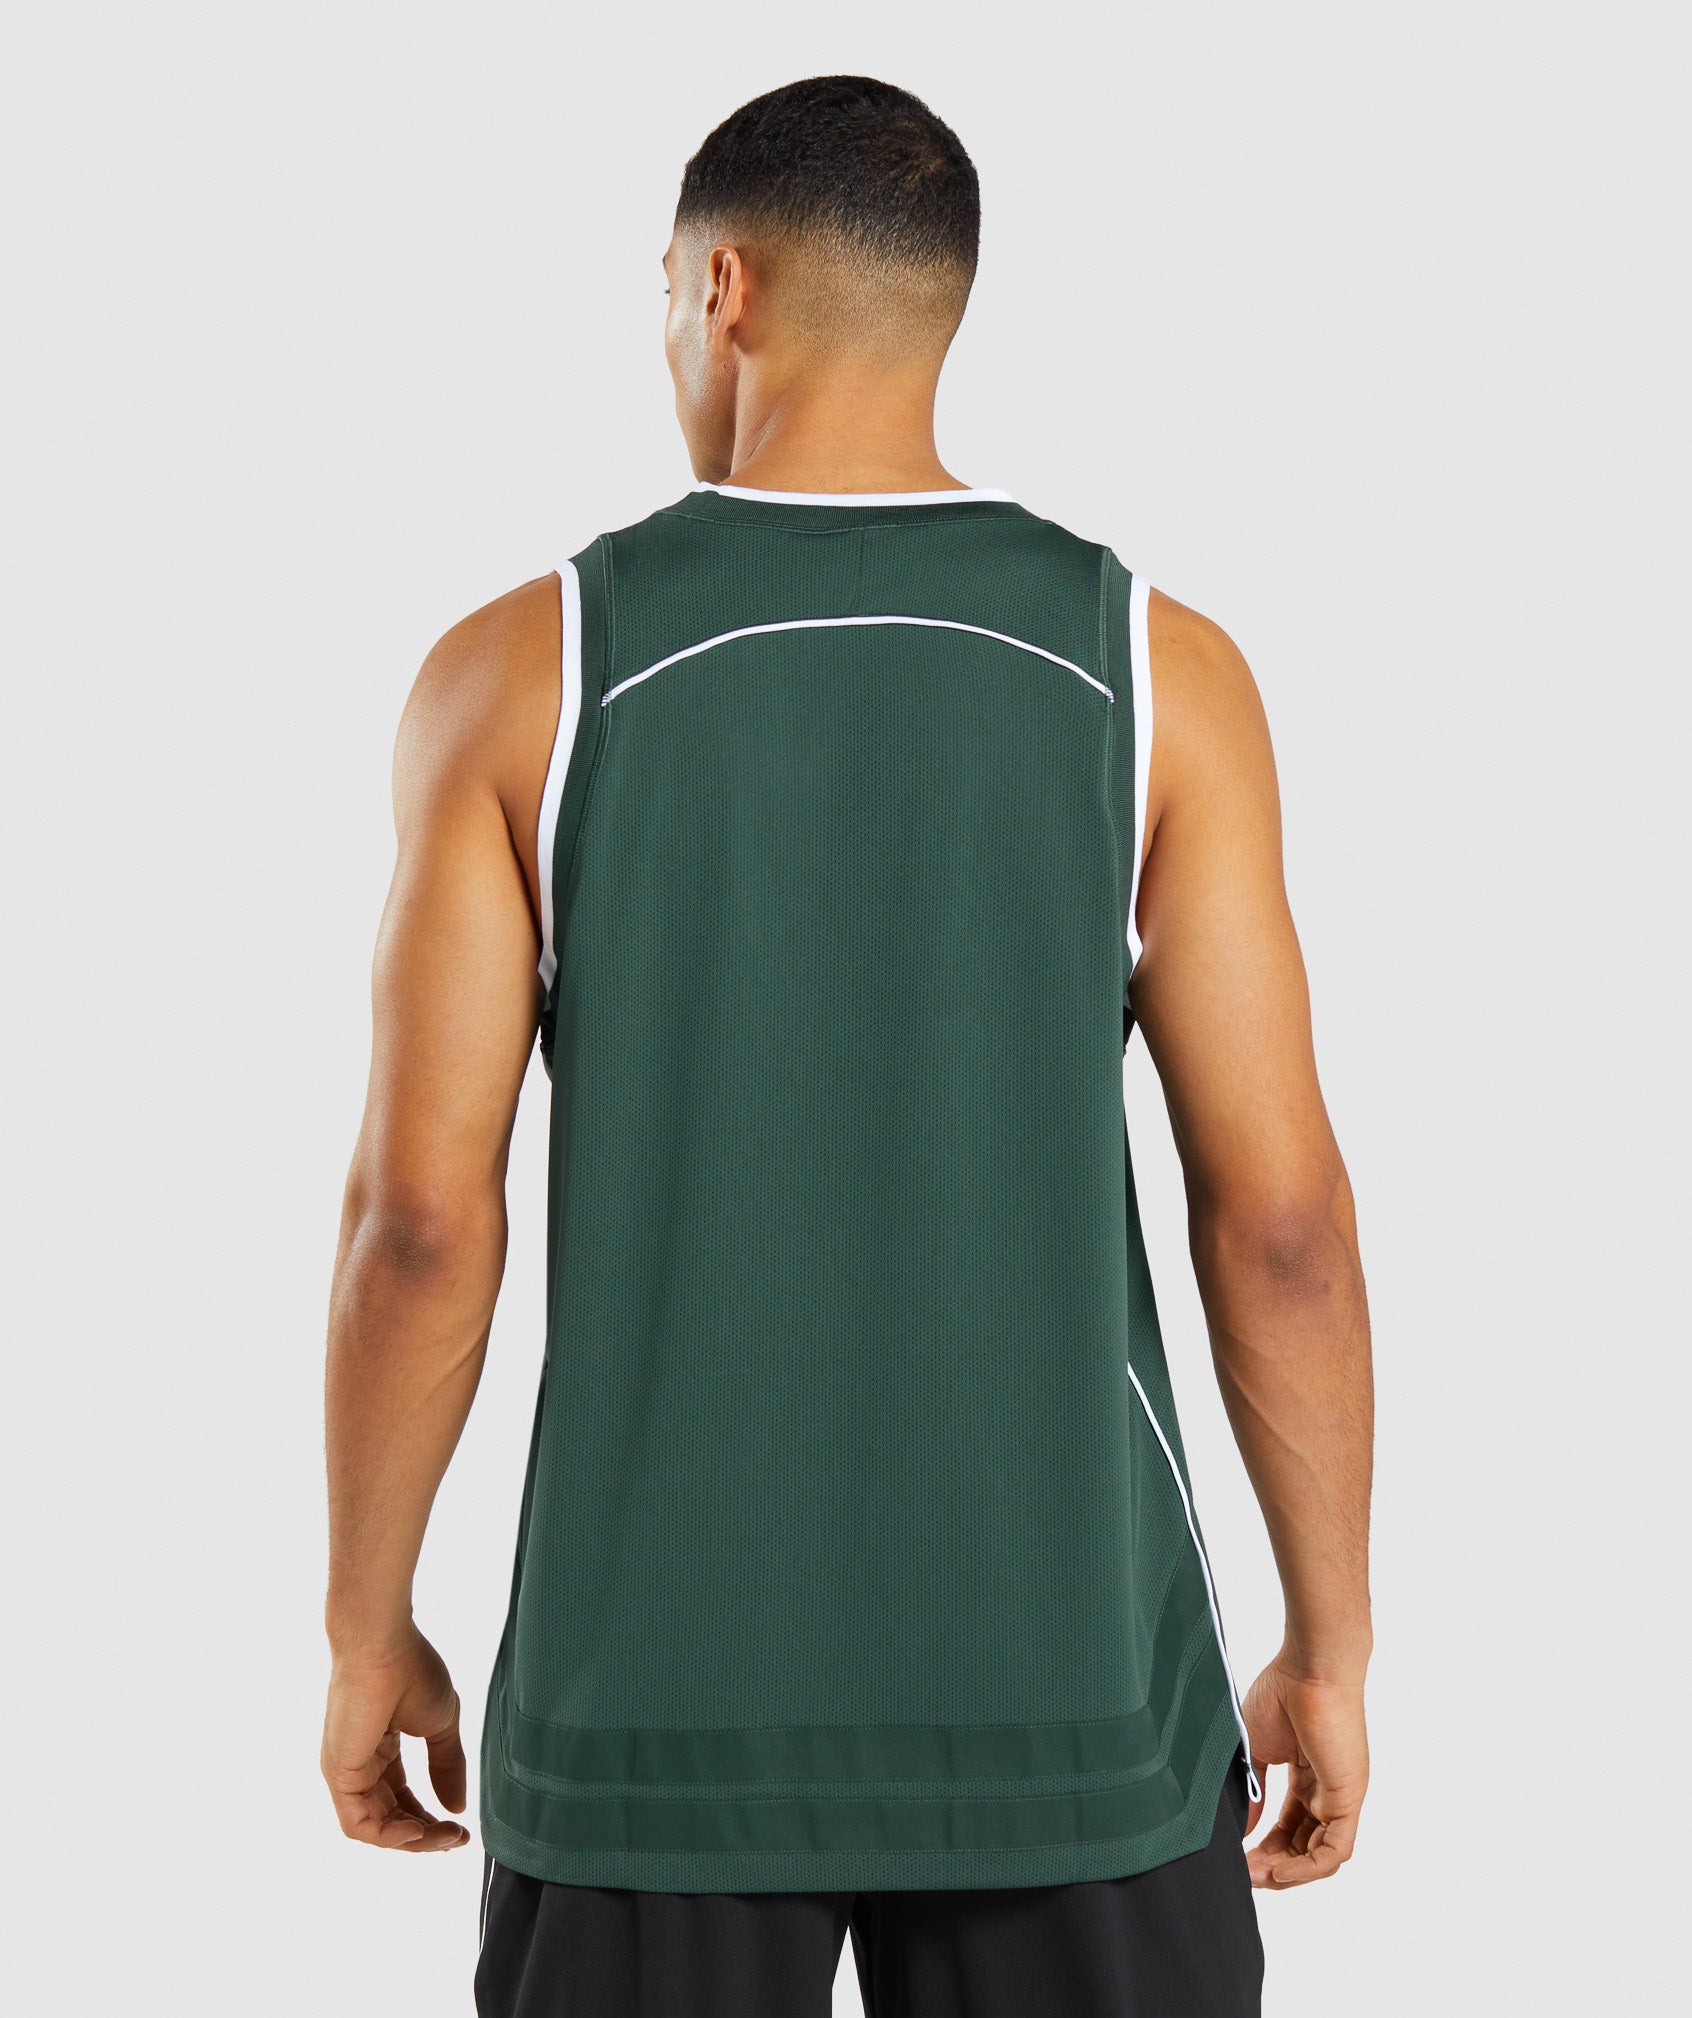 Recess Basketball Tank in Obsidian Green/White - view 2